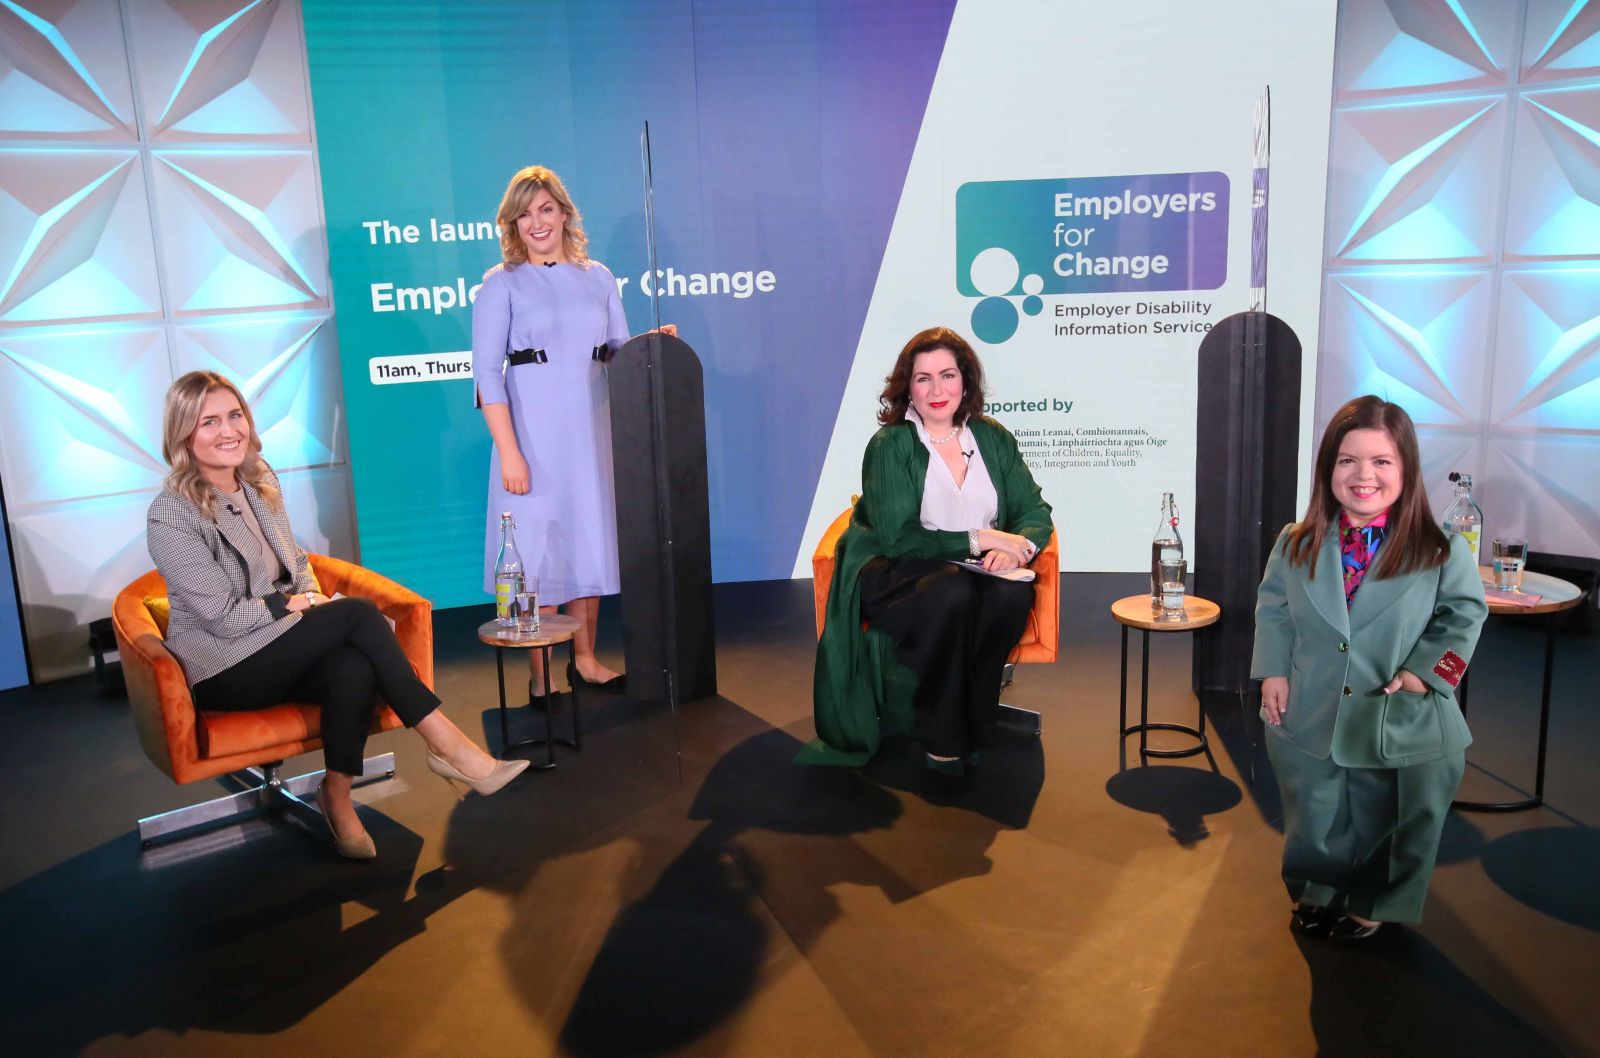 The launch of Employers for Change